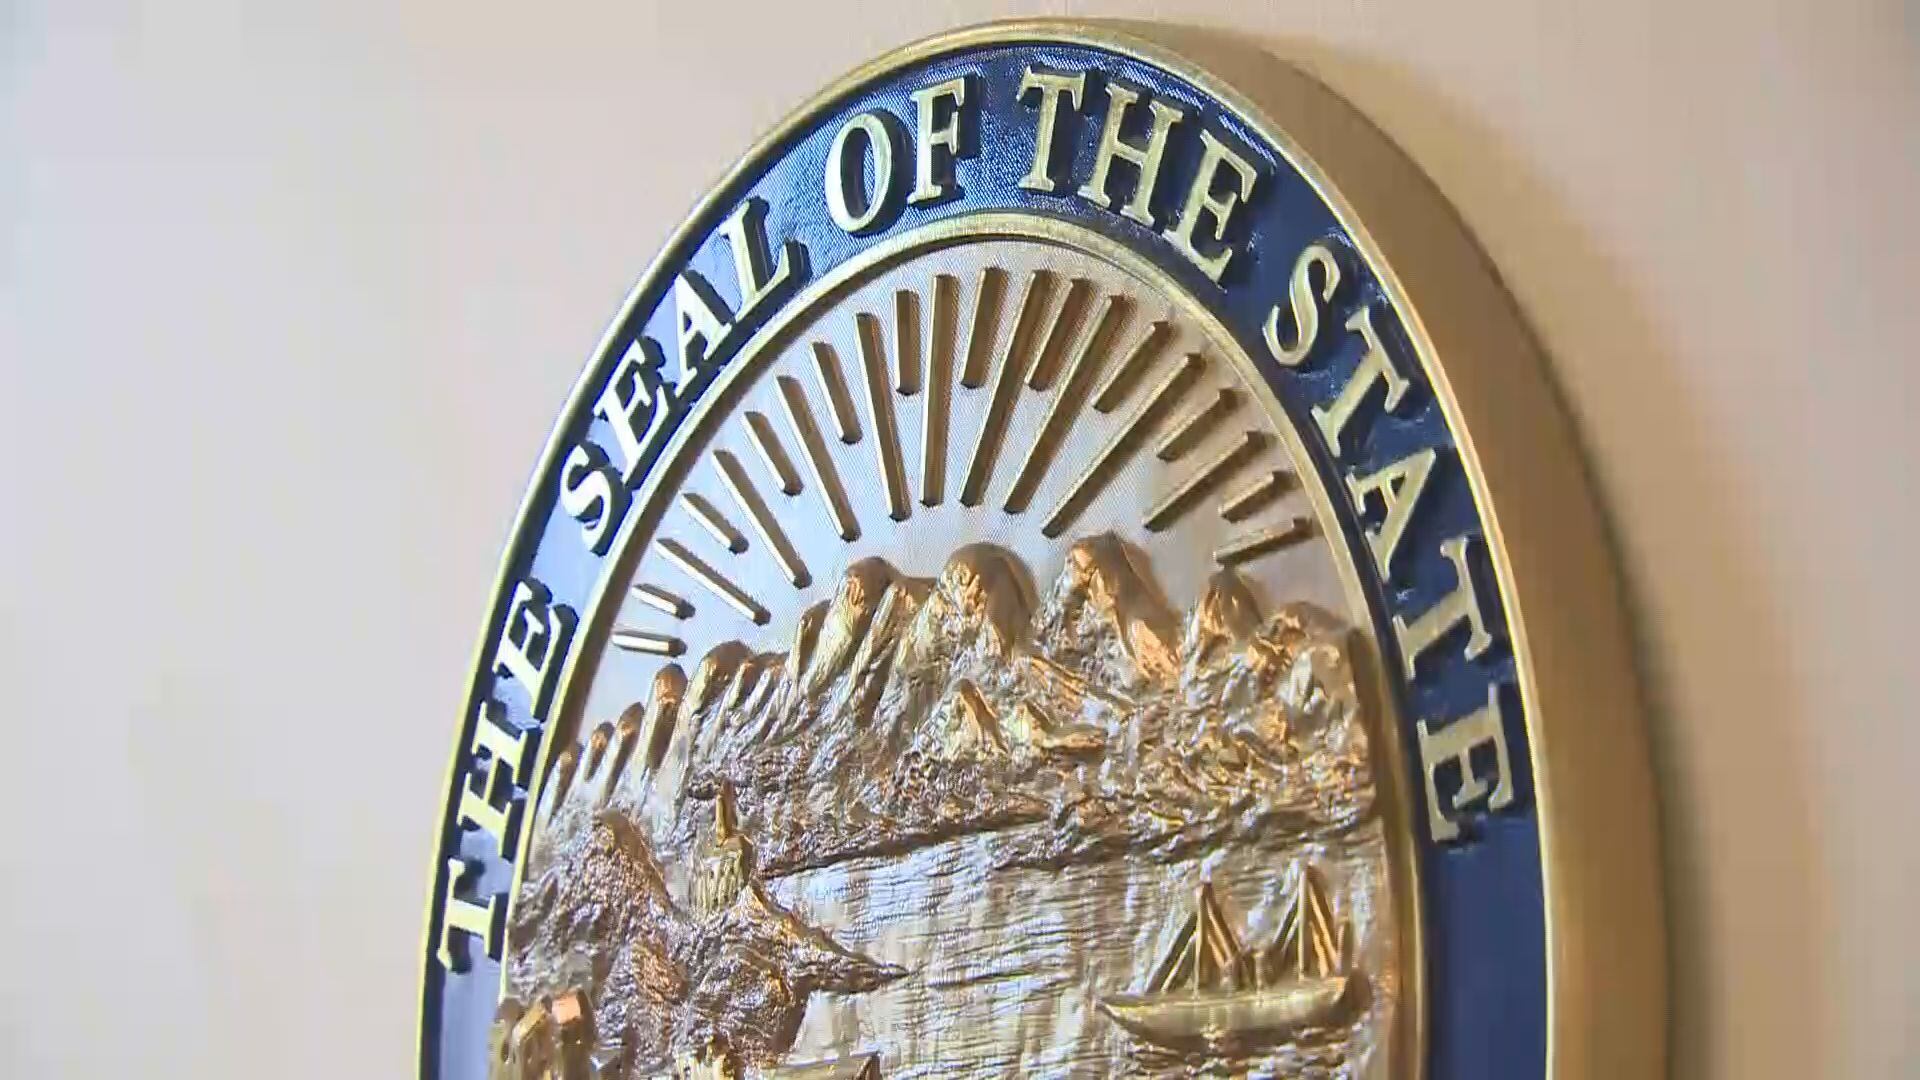 Seal of the state of Alaska